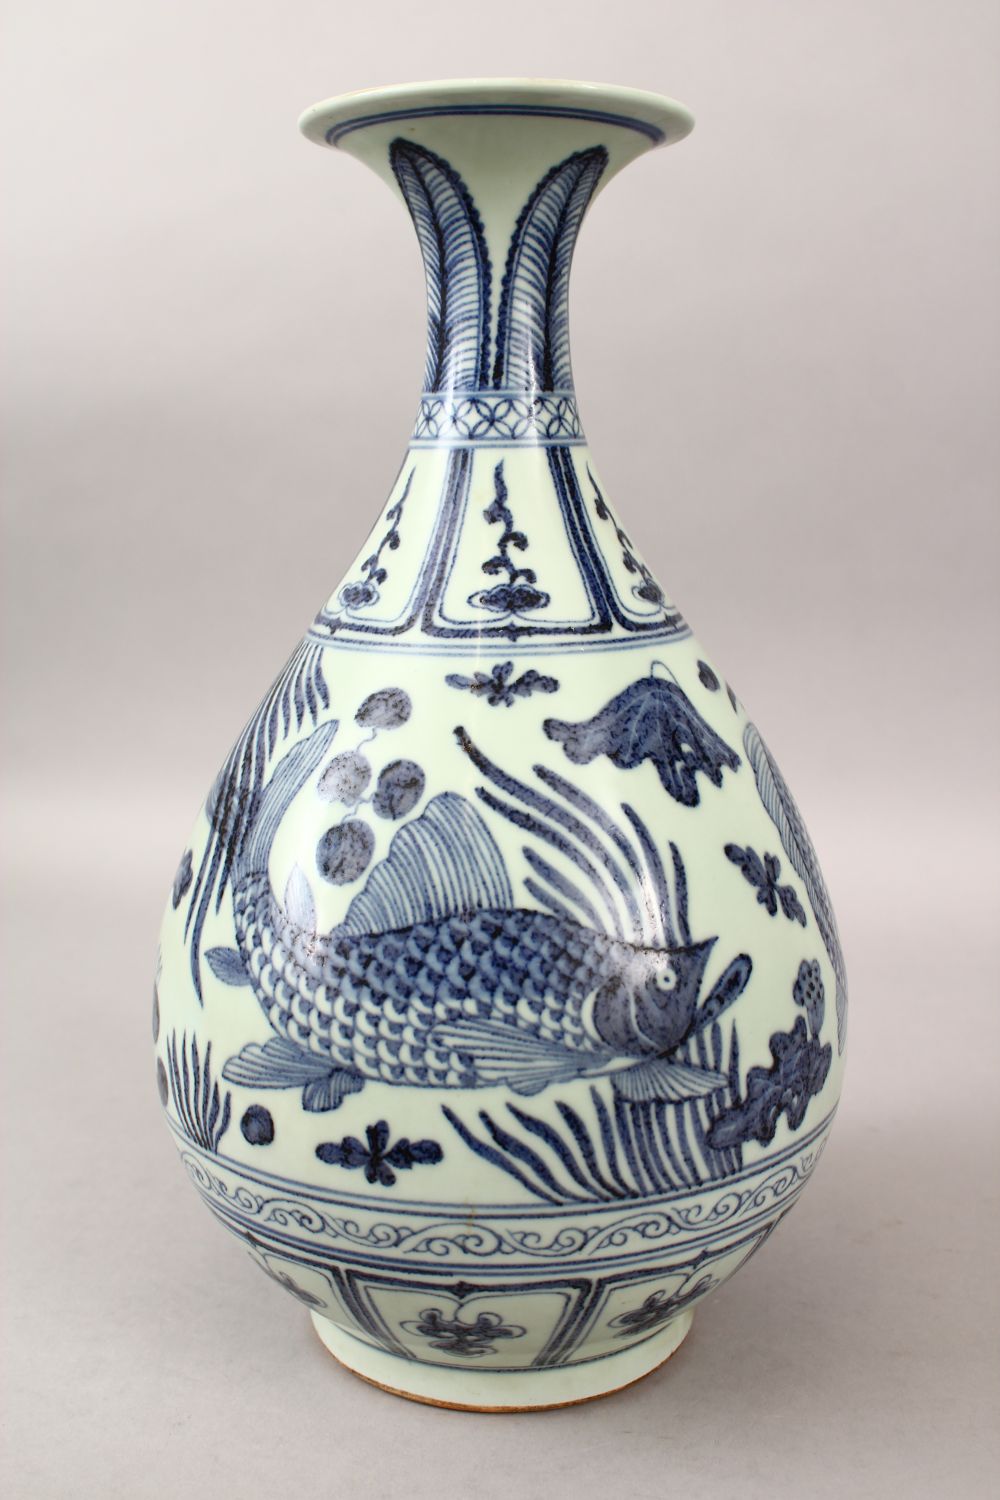 A LARGE CHINESE MING STYLE BLUE & WHITE PORCELAIN CARP VASE, the body of the vase decorated with - Image 3 of 10